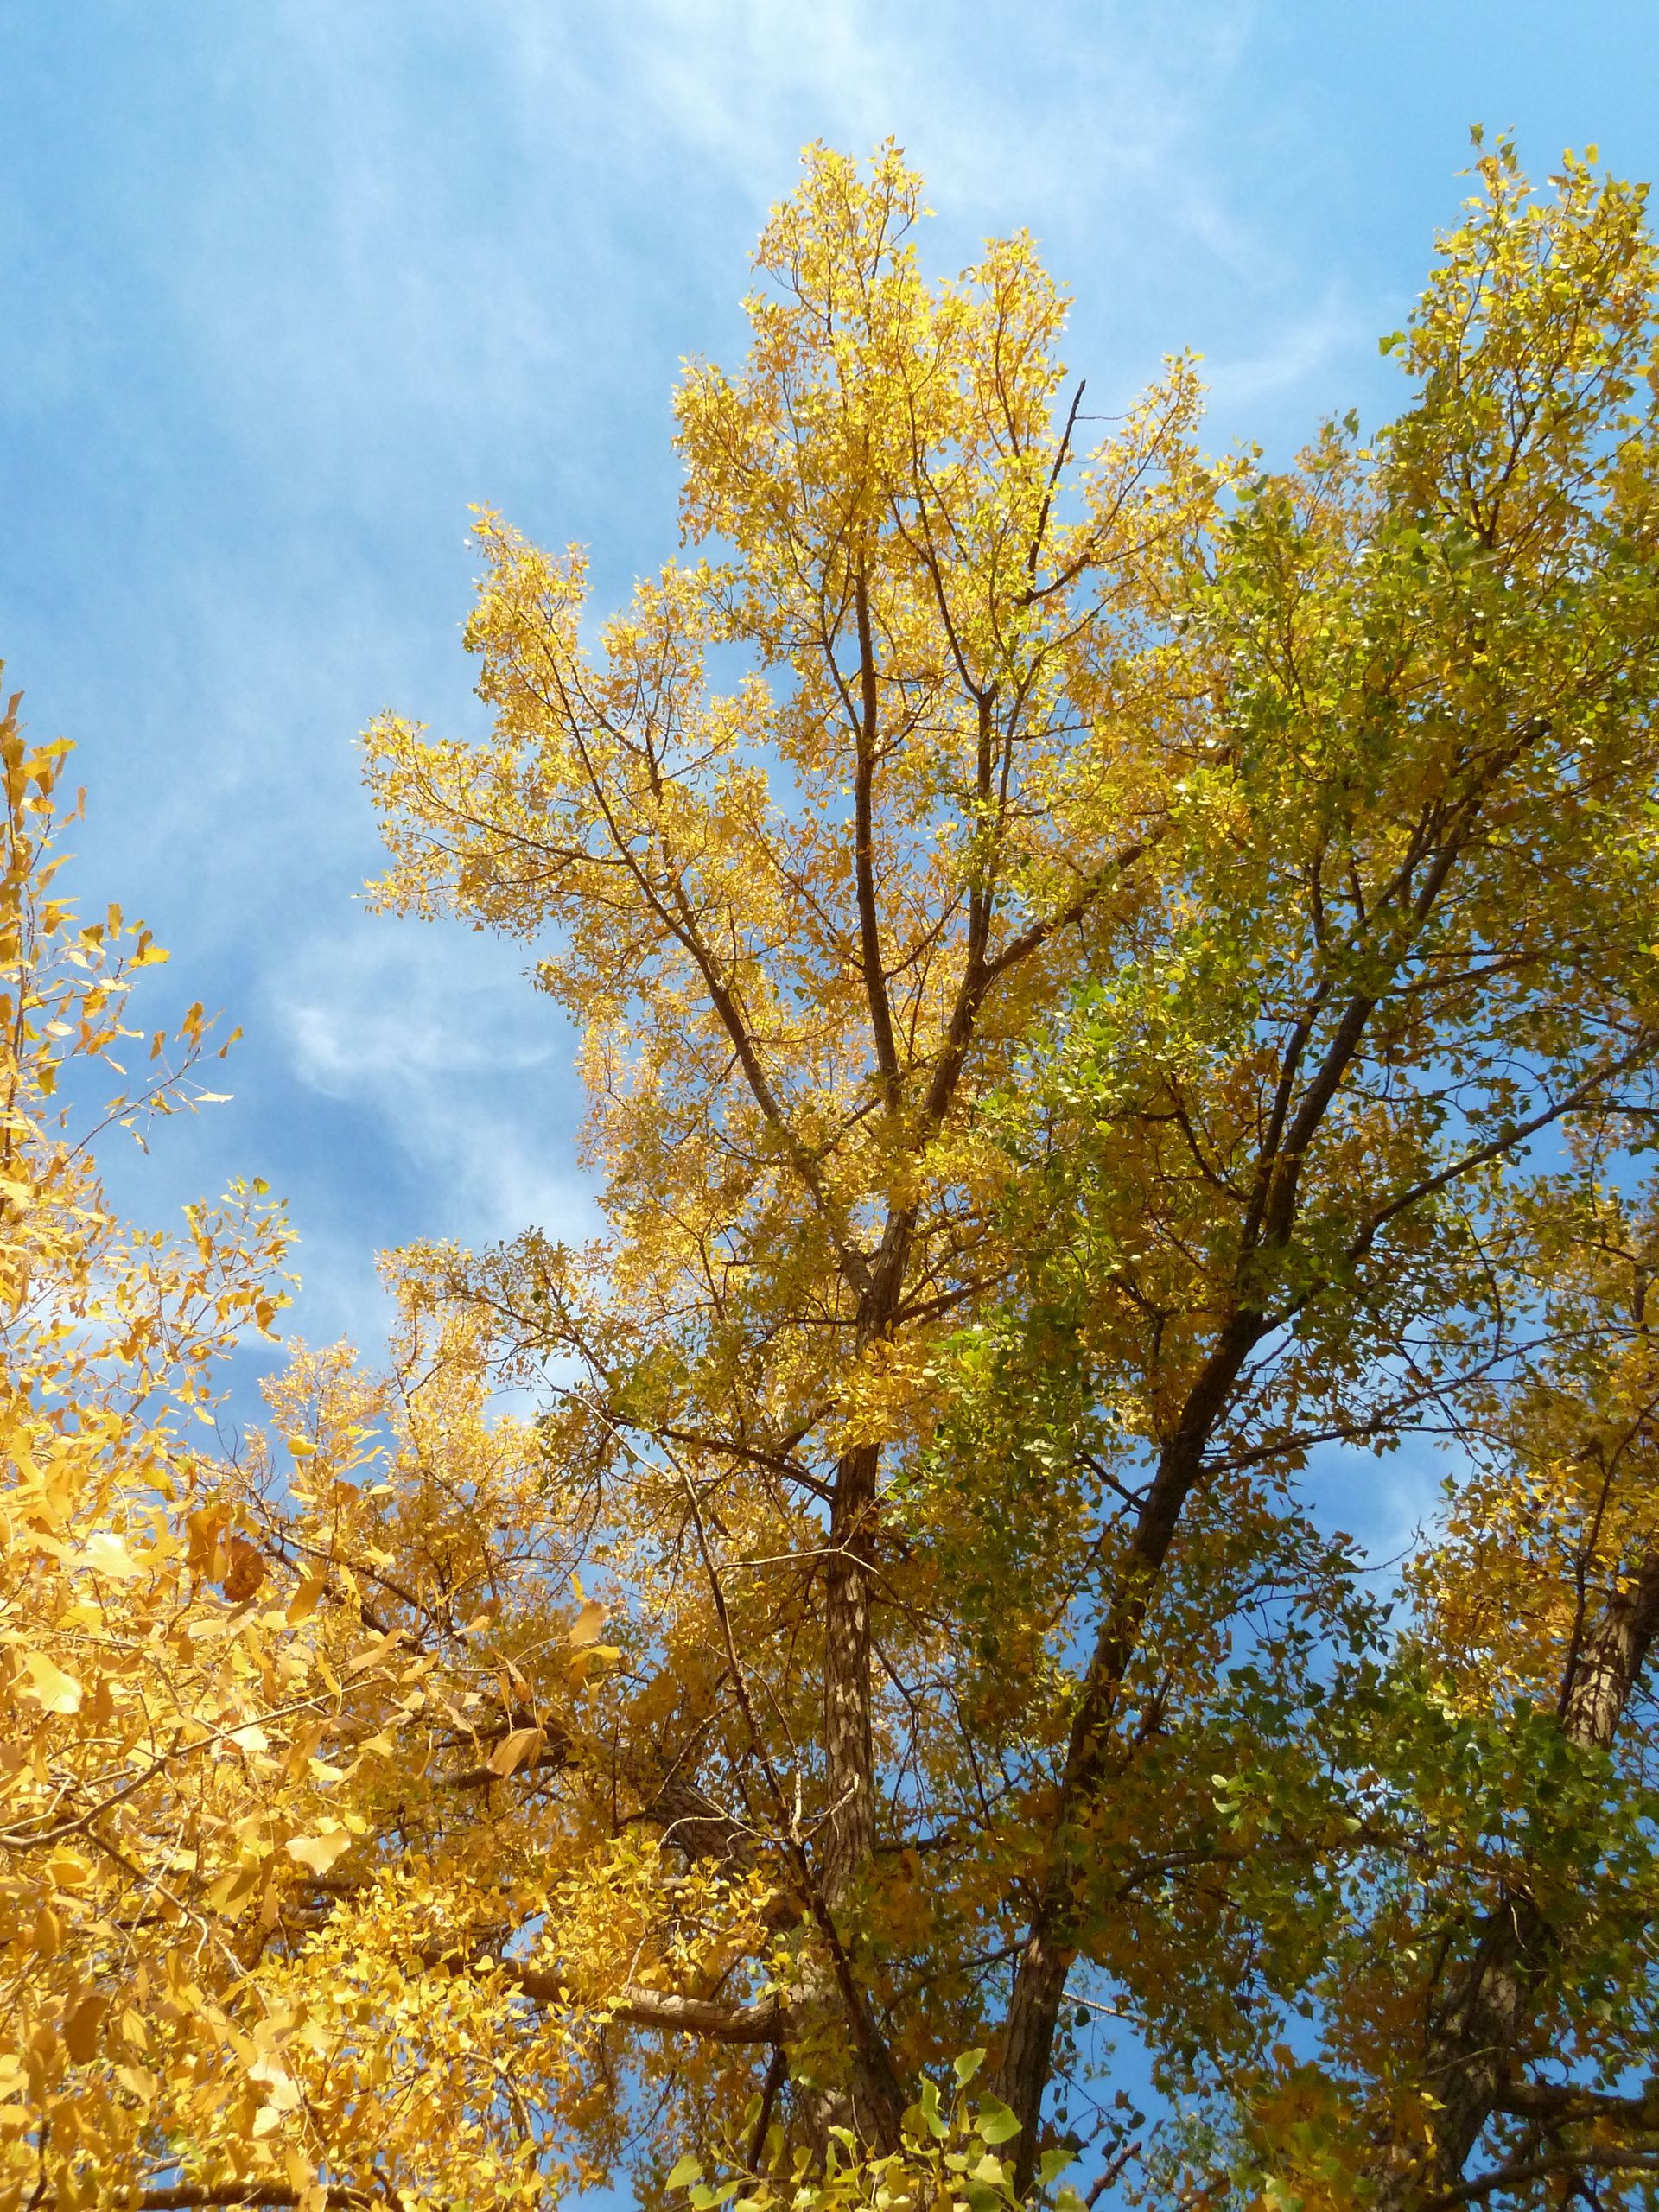 Trees with yellow leaves in autumn.